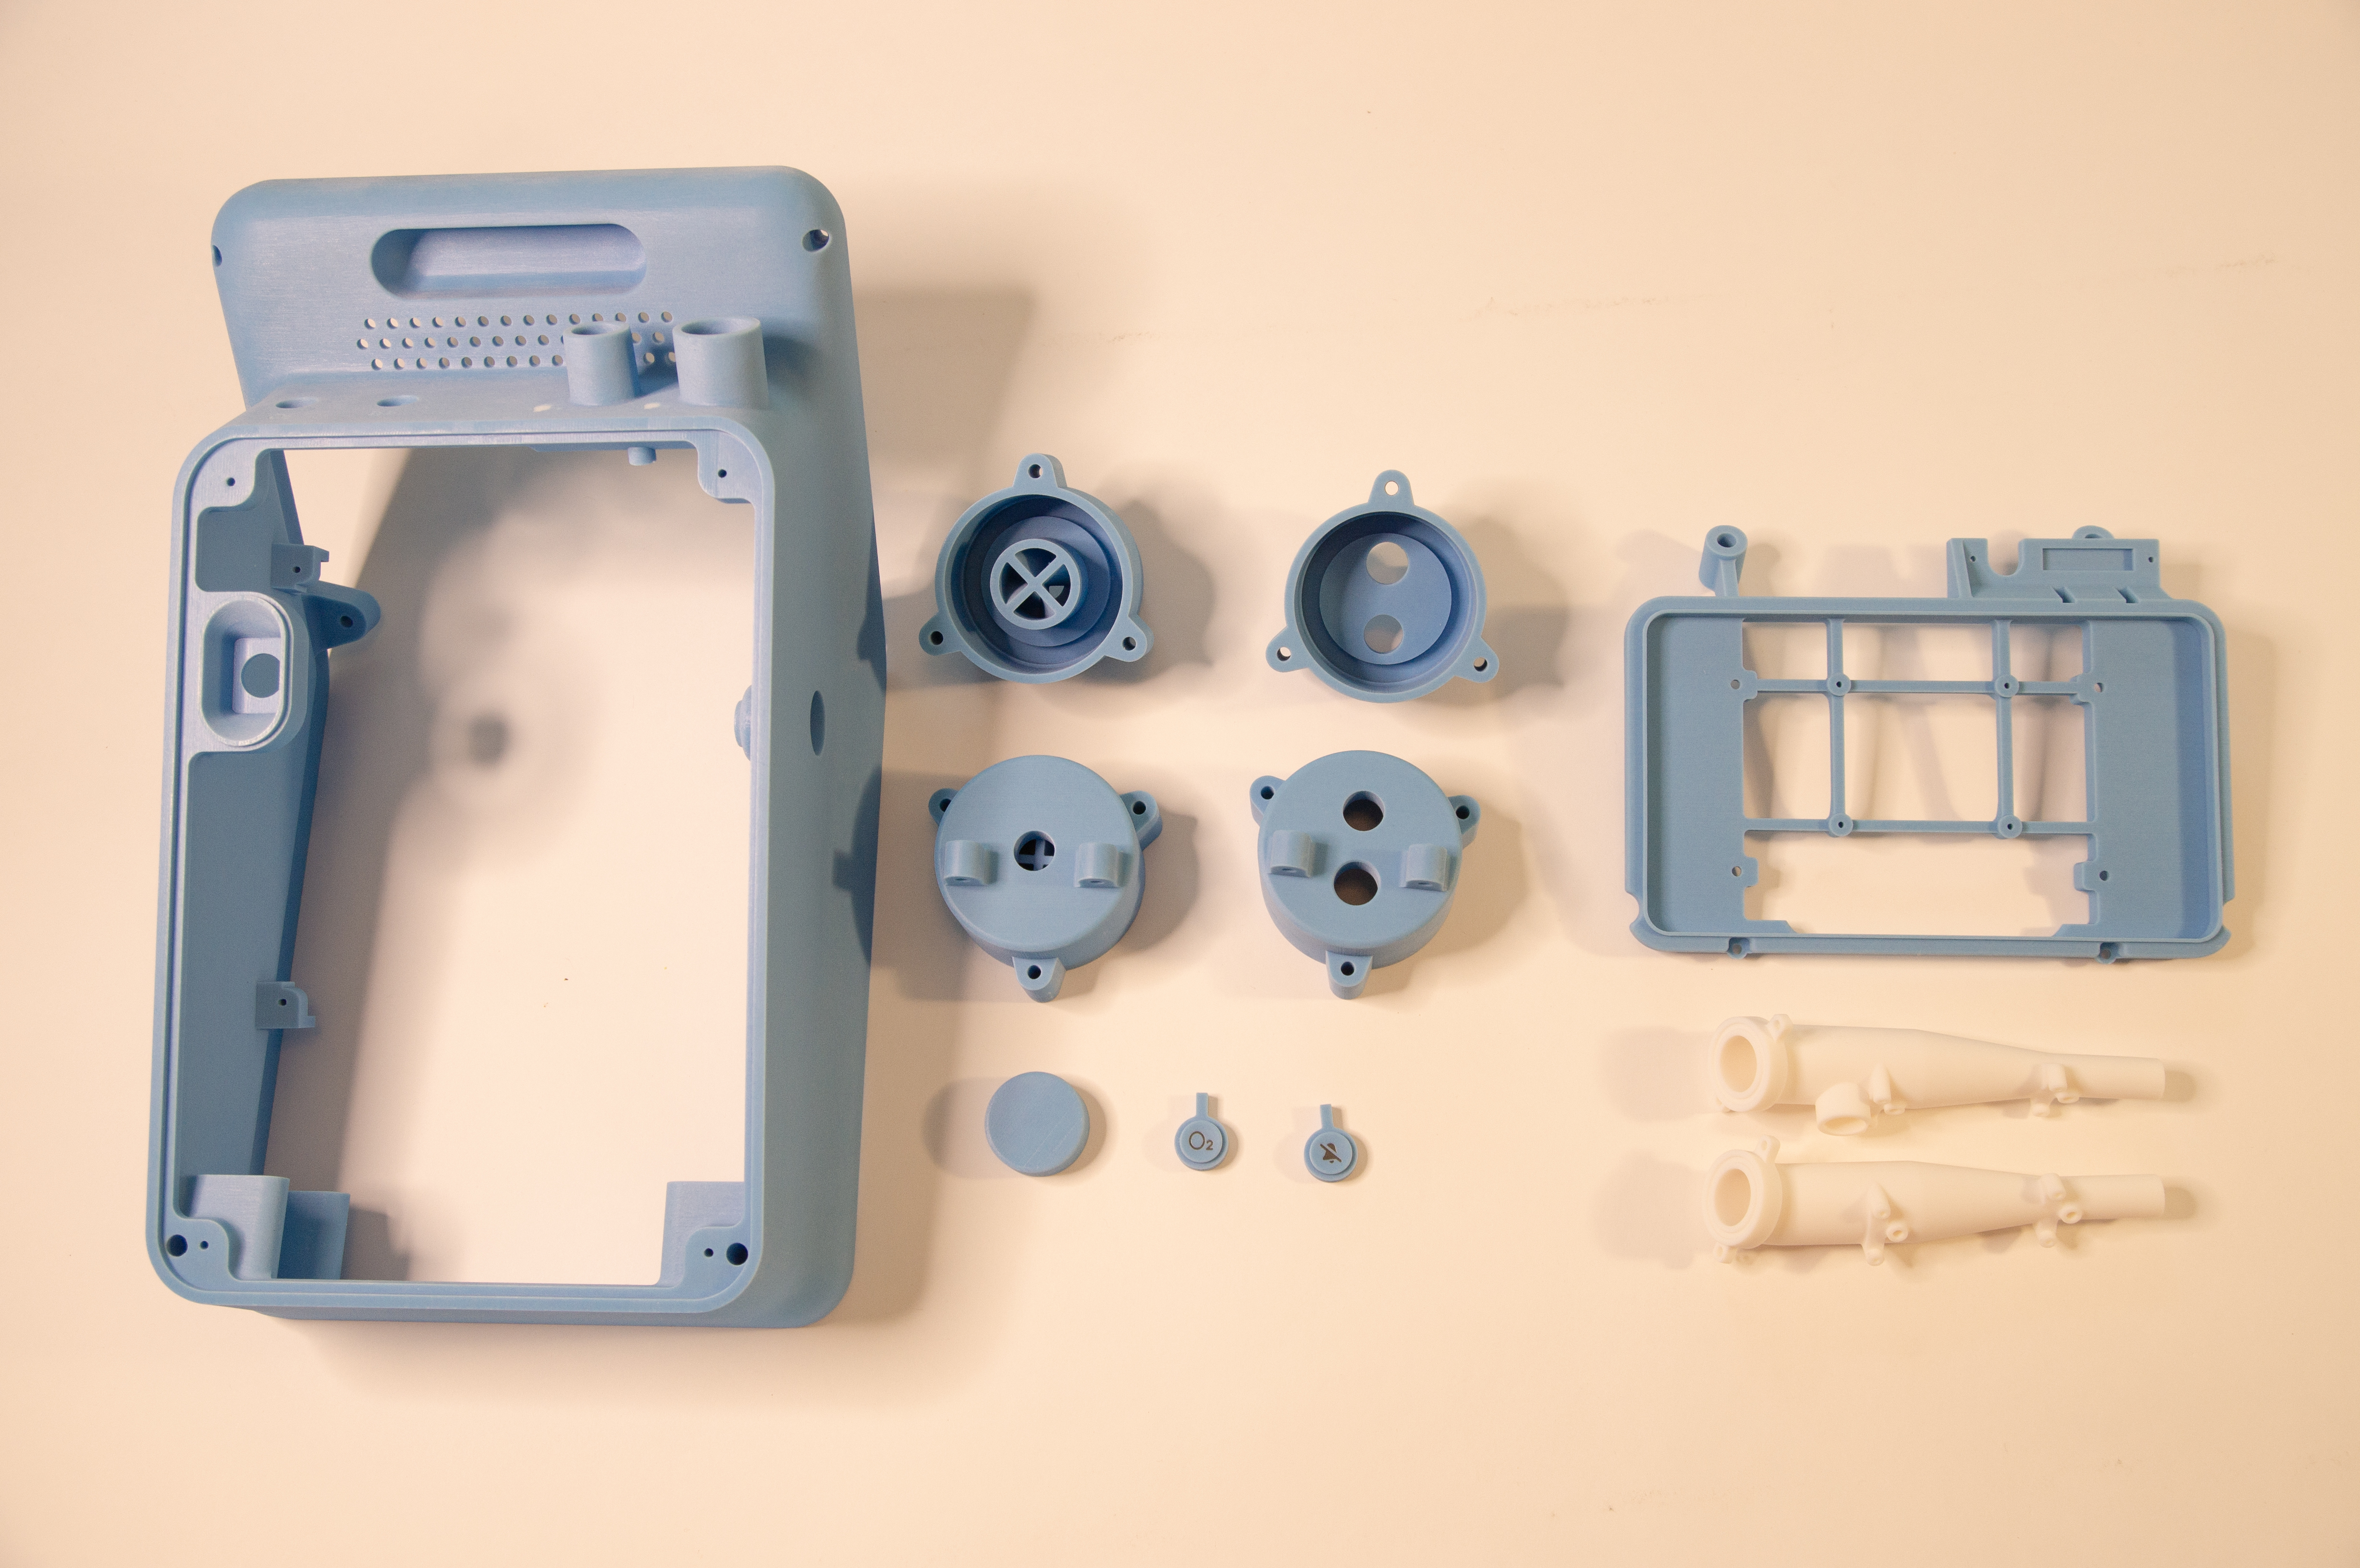 The second-placed InVent Pneumatic Ventilator design's prototype parts (pictured), were produced using a Stratasys J850 3D printer. Photo via BusinessWire.